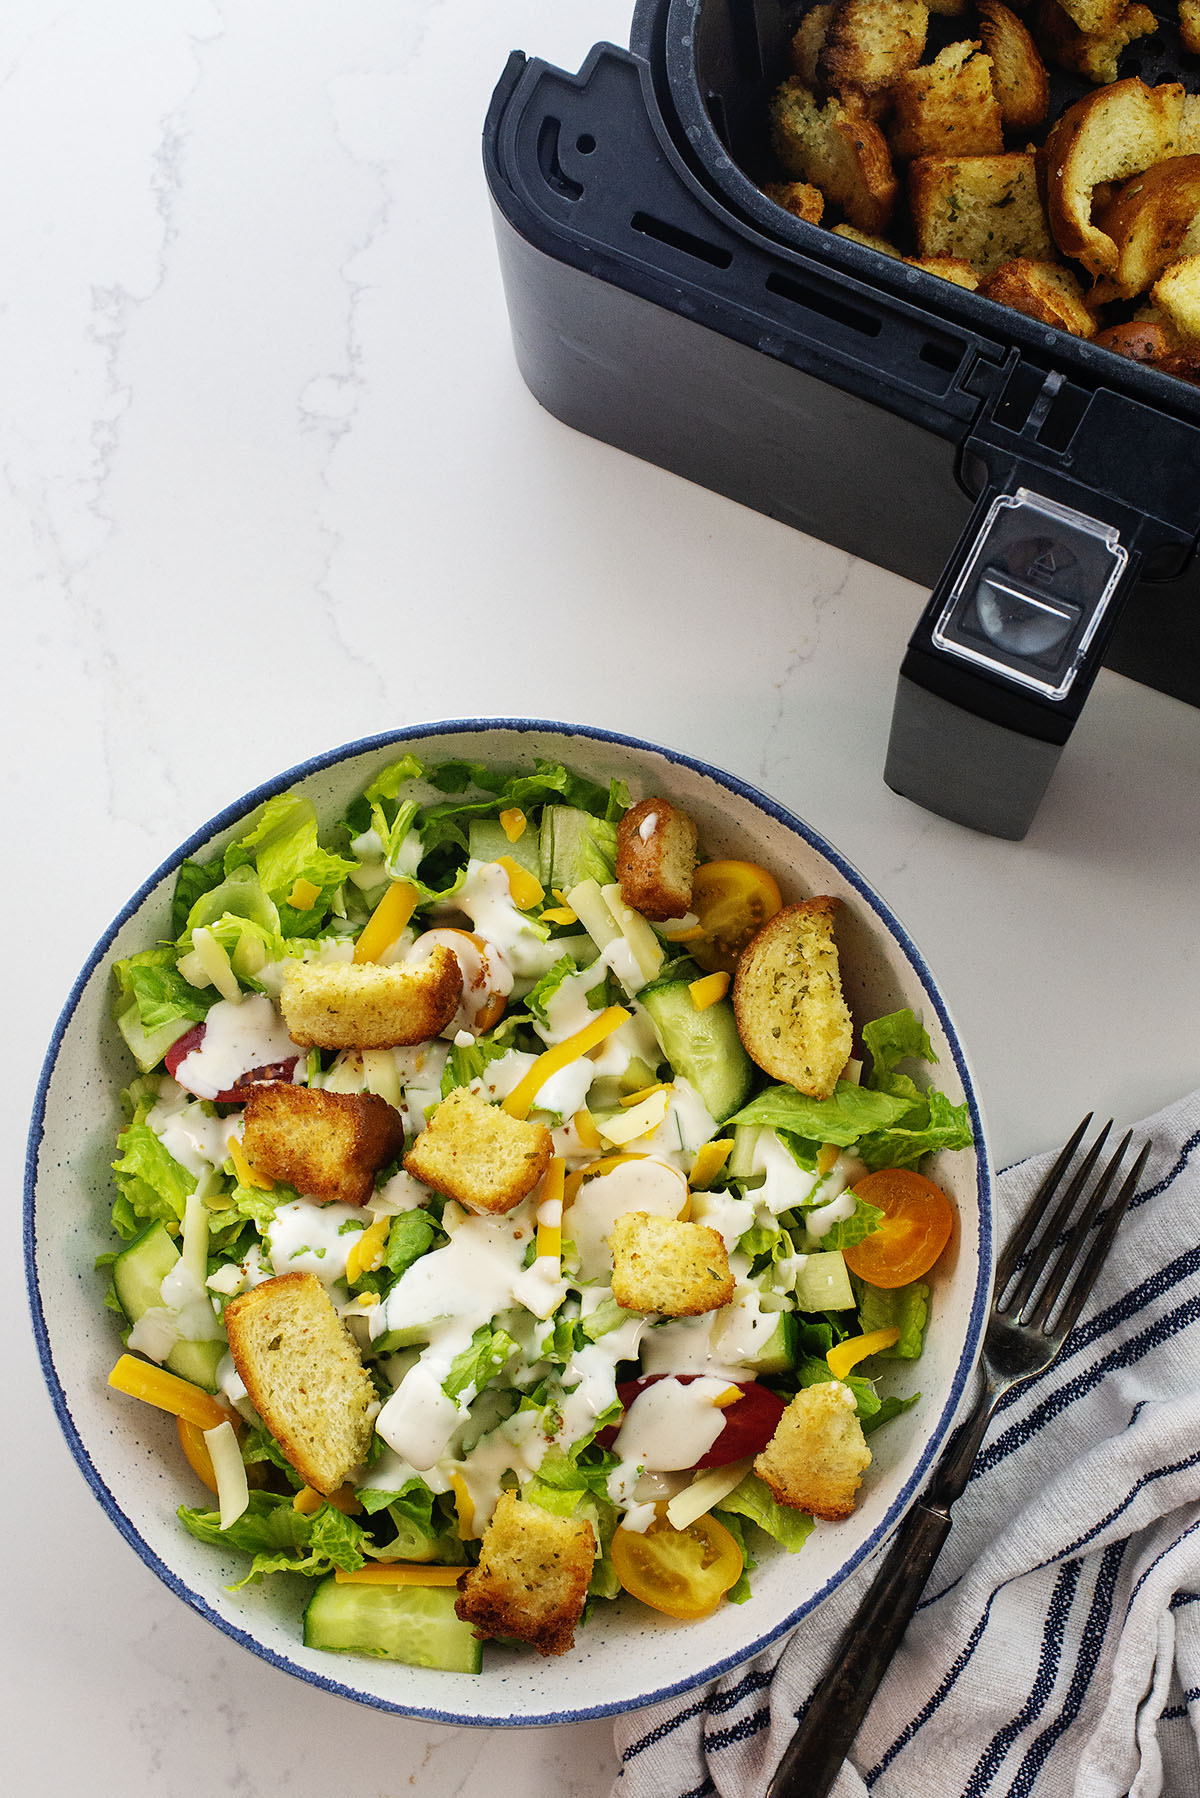 Overhead view of a salad with croutons in front of an air fryer.